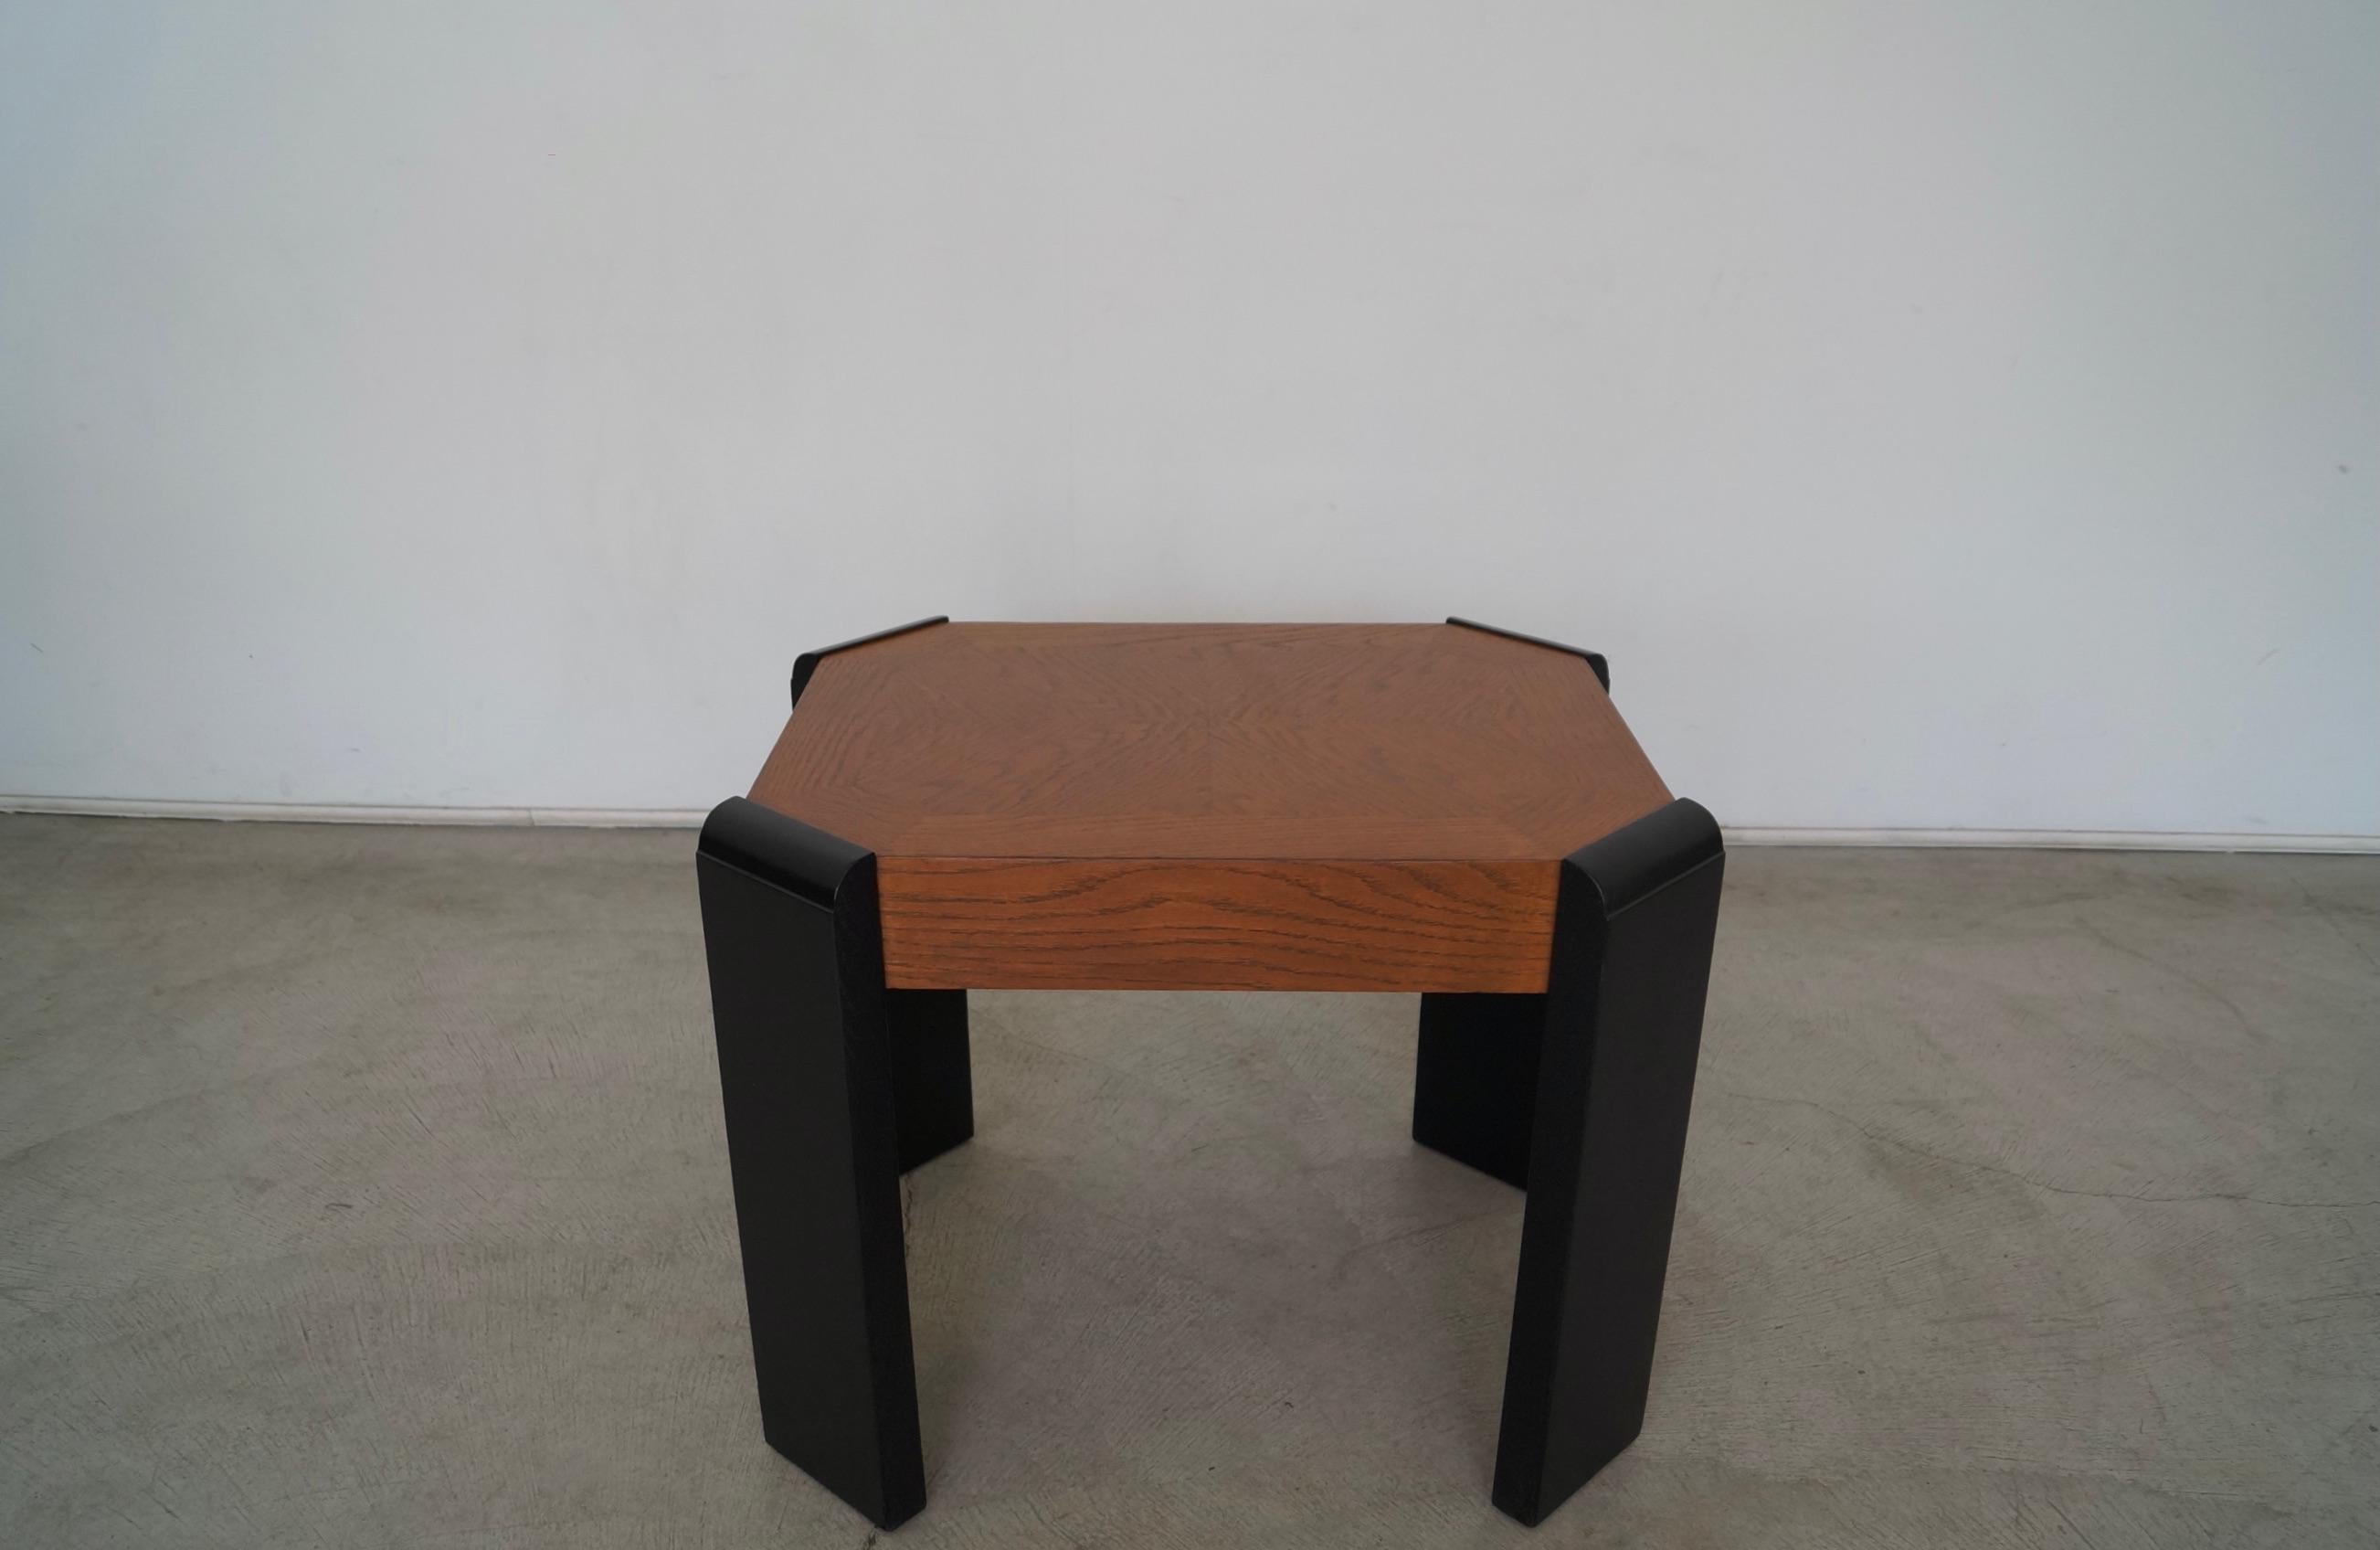 Vintage post-modern end table for sale. From the 1970's, and manufactured by Lane. It has been professionally refinished, and is beautifully restored. It has black finished legs with a walnut finished surface. It's really solid and well made, and